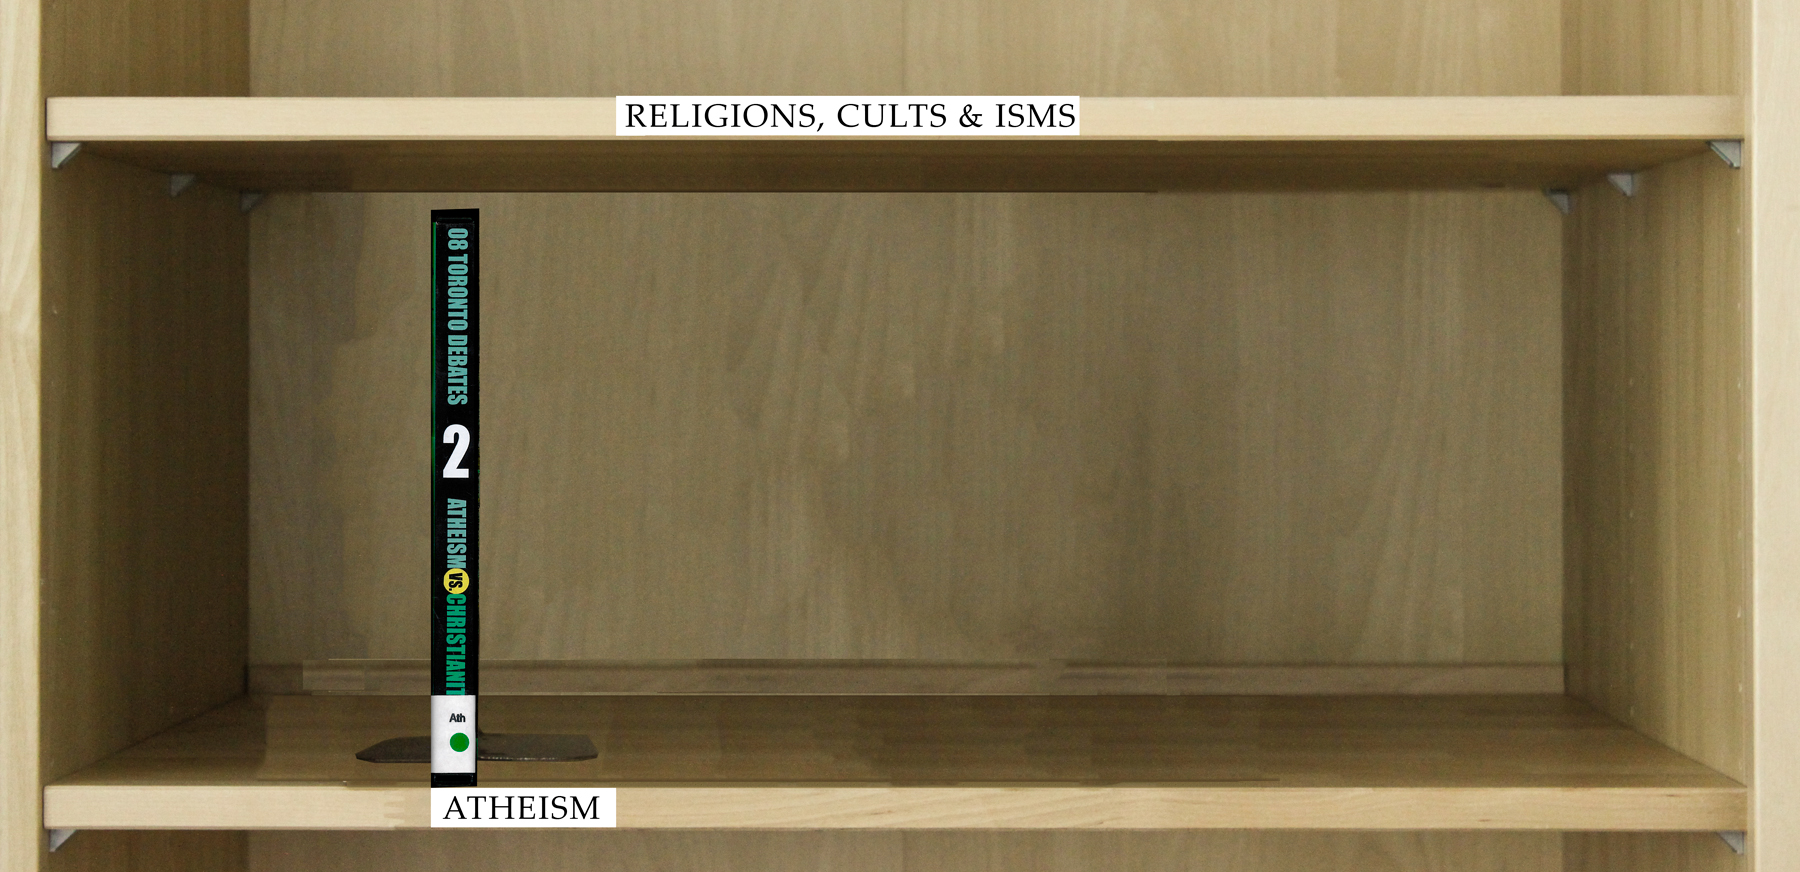 Index of DVD's Under the Category Atheism.